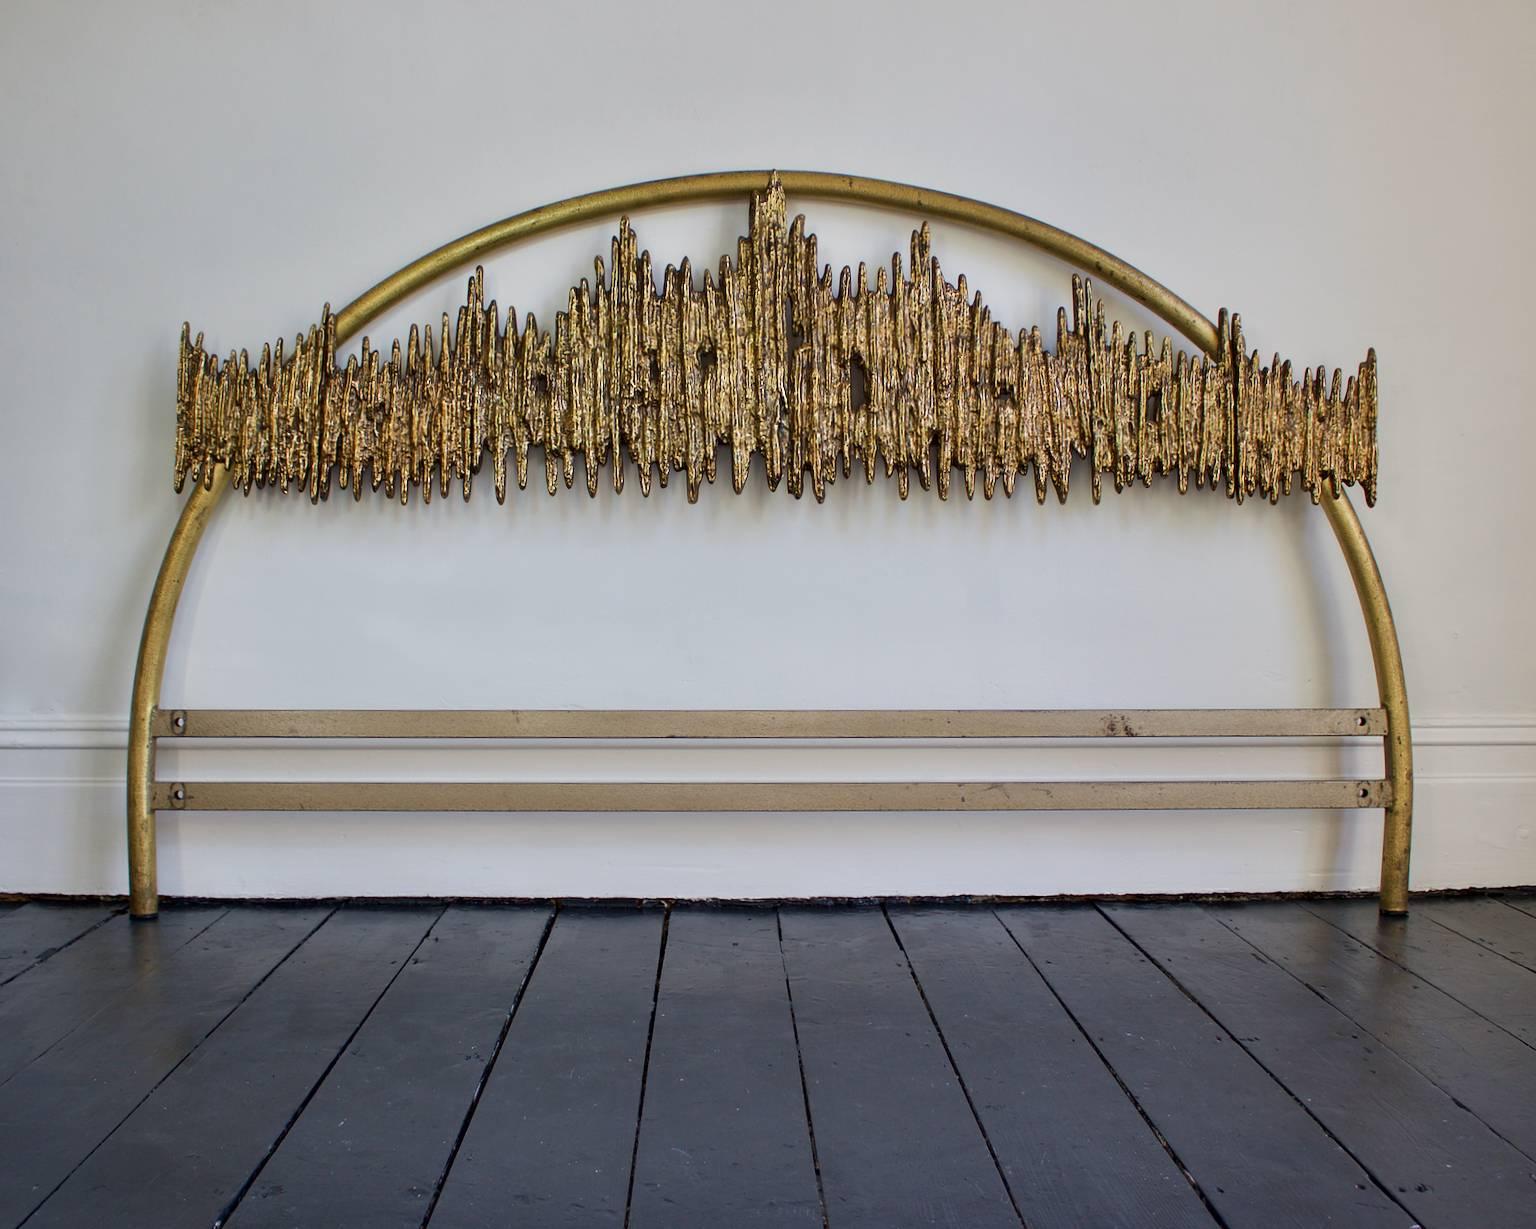 Headboard with large brutalist bronze sculpture by Frigerio, Italy, 1960s.

The headboard comprises an arc of lacquered steel (deep gold in colour) overlaid with a large brutalist sandcast sculpture. The sculpture is bolted to the bed frame; it